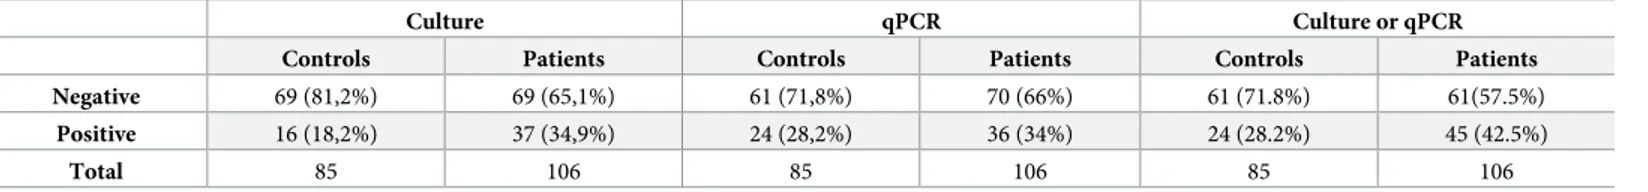 Table 3. Comparison between frequency of qPCR and culture.